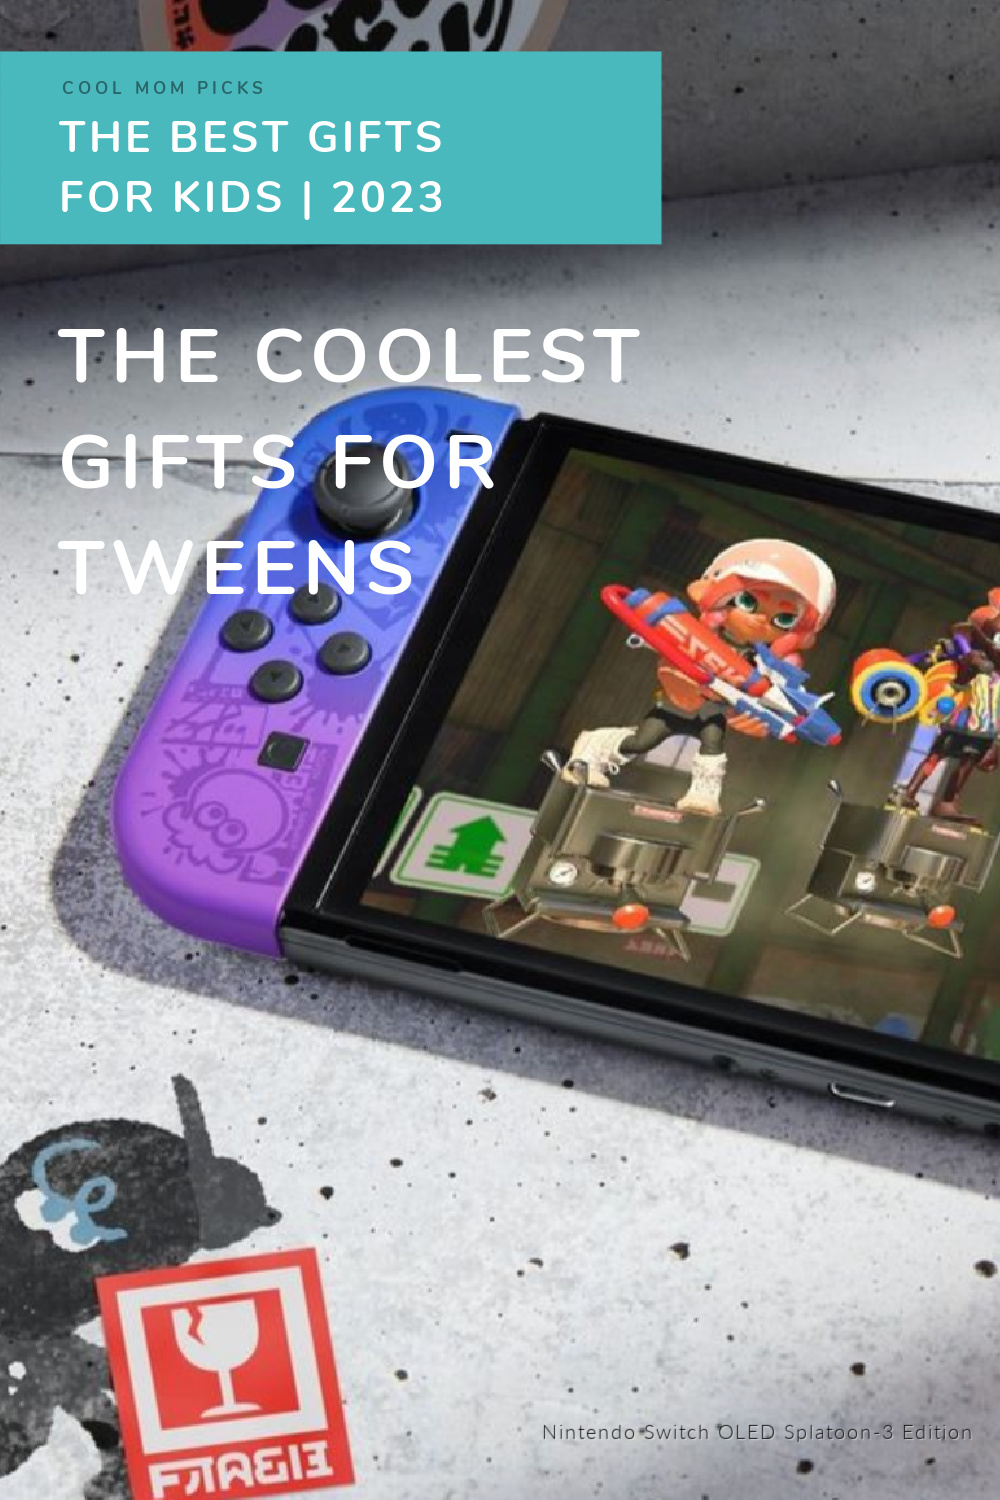 The coolest gifts for tweens 2023: Cool Mom Picks 